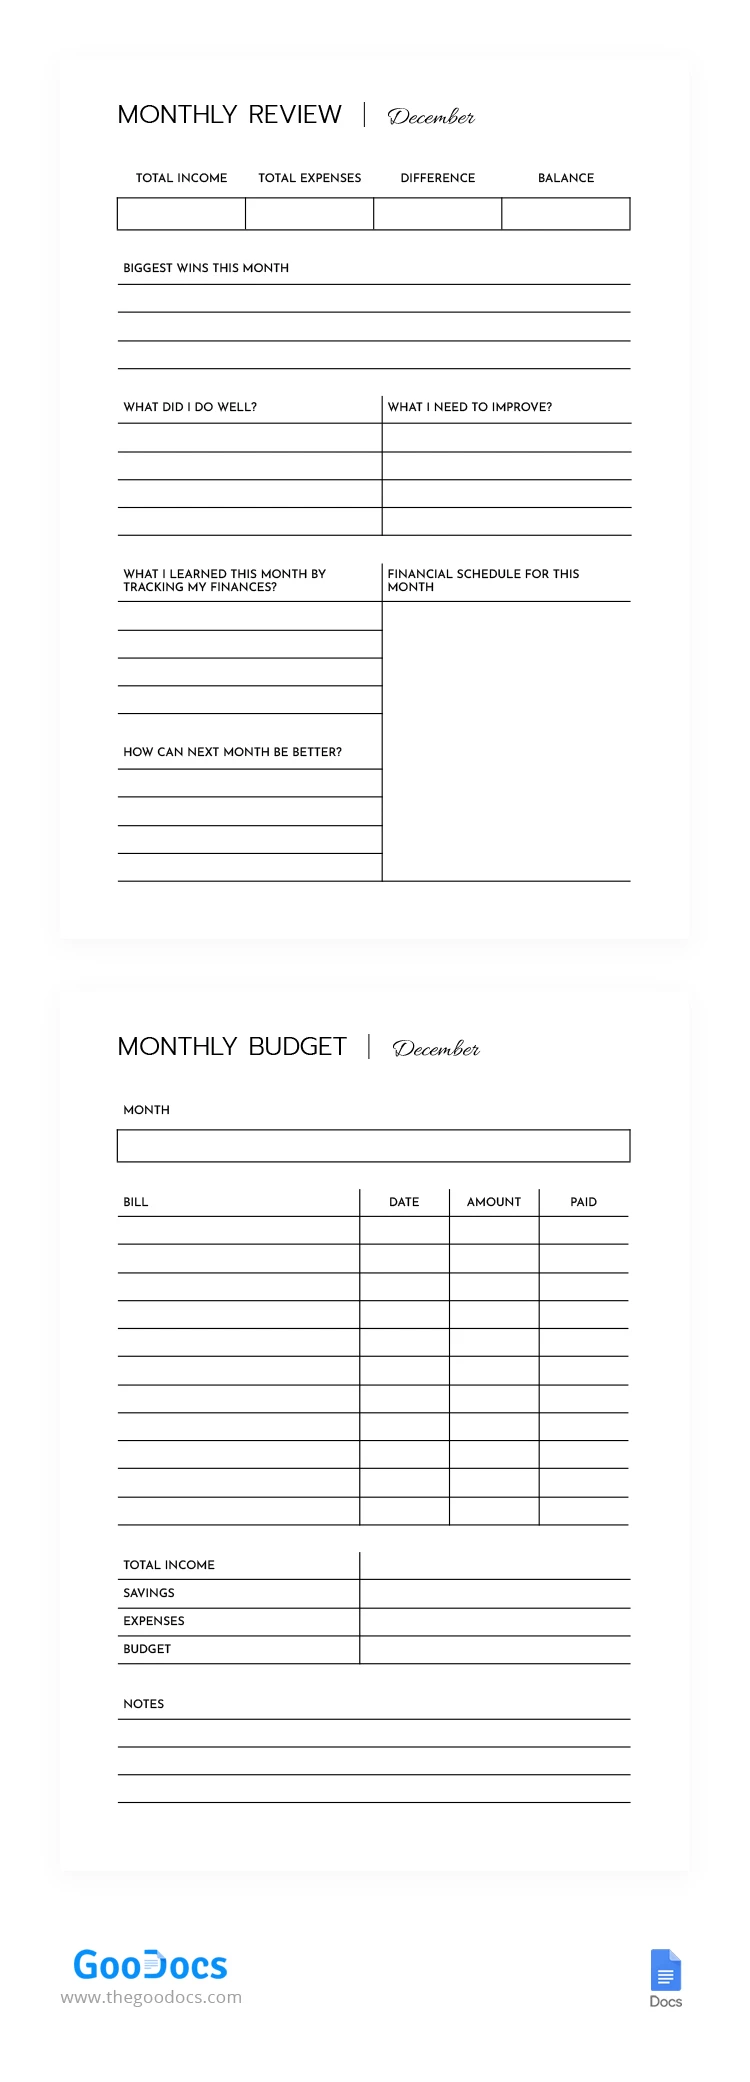 Monthly Financial Budget - free Google Docs Template - 10068568